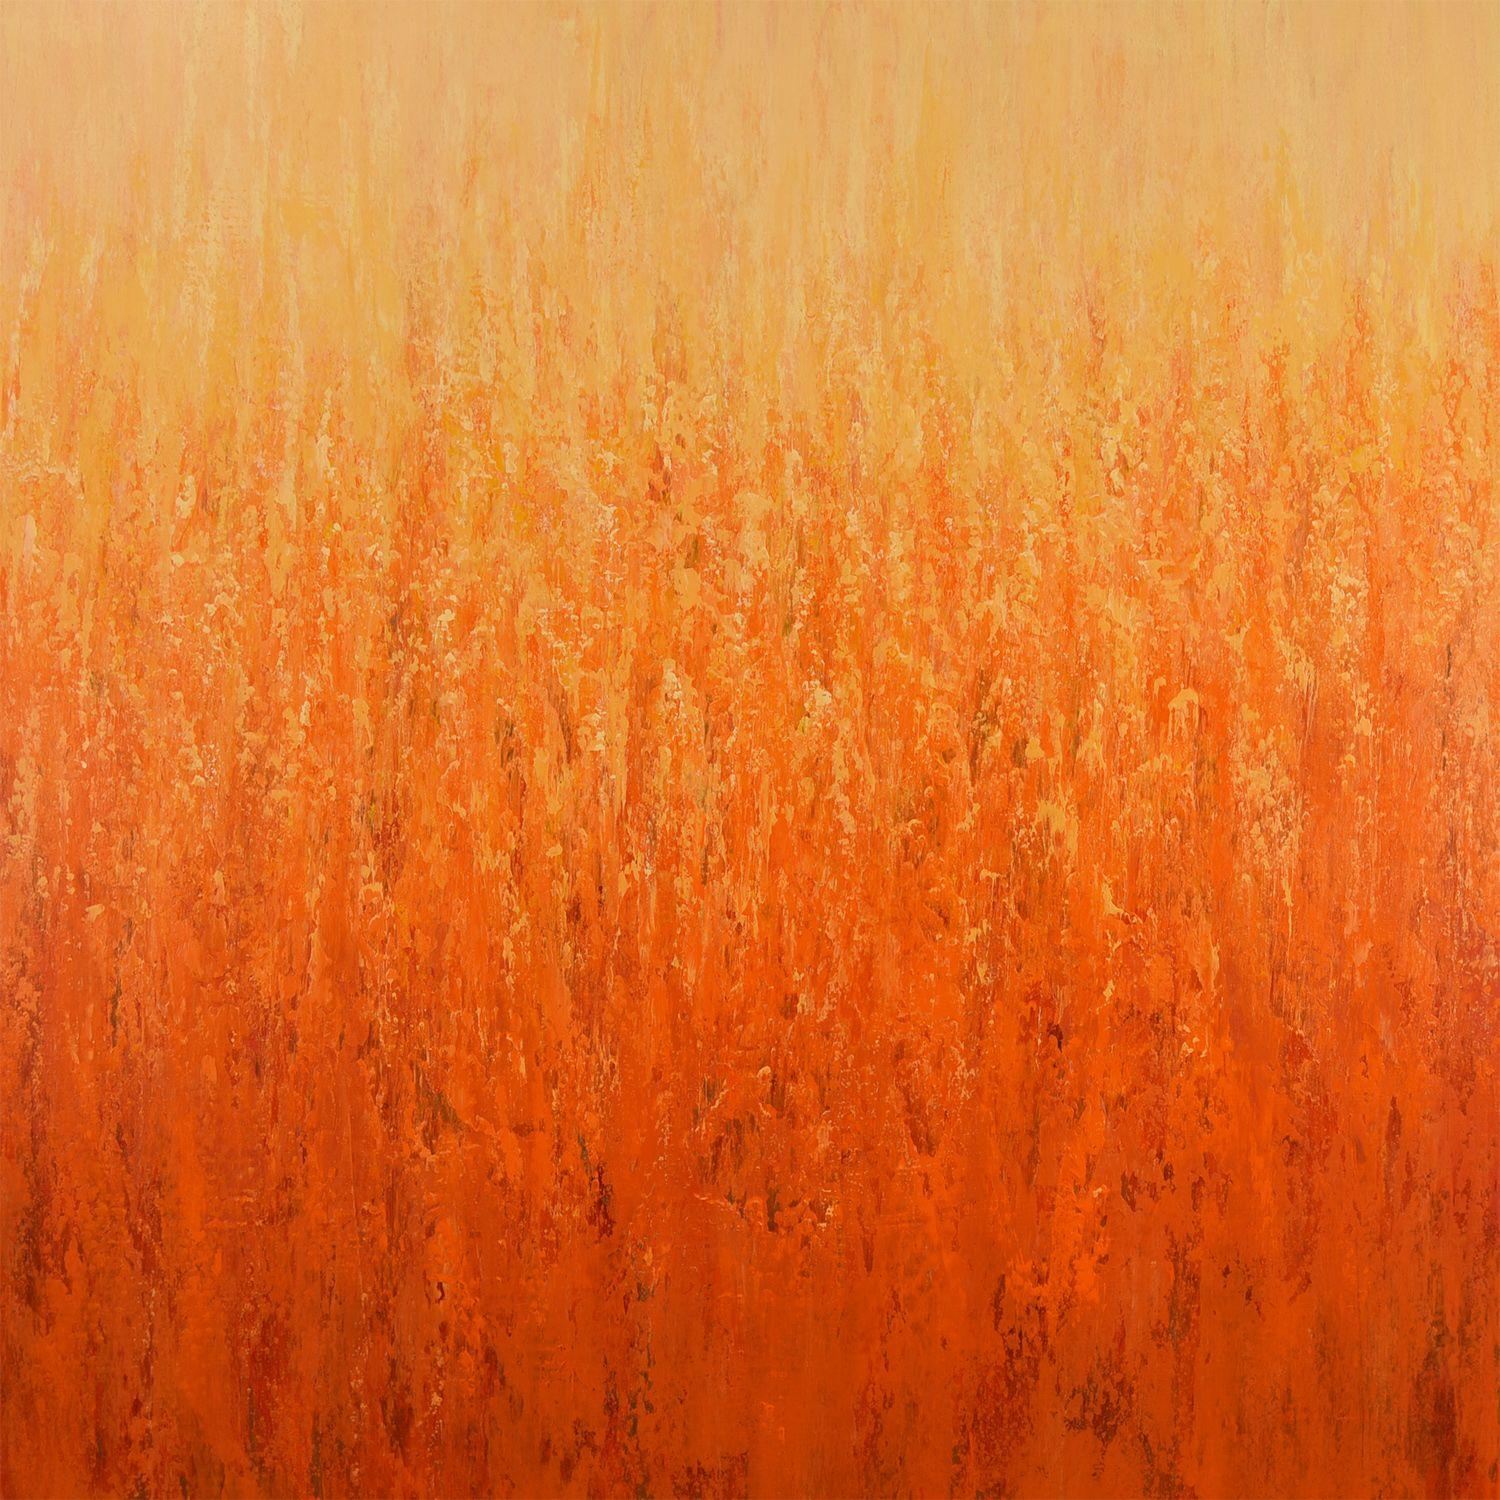 Vibrant Light is an original acrylic painting on canvas by Suzanne Vaughan. An abstract expressionist style painting with thick layers of paint and textural transitions in rich vibrant orange and yellow.    Painted on a piece of 48â€ x 48â€